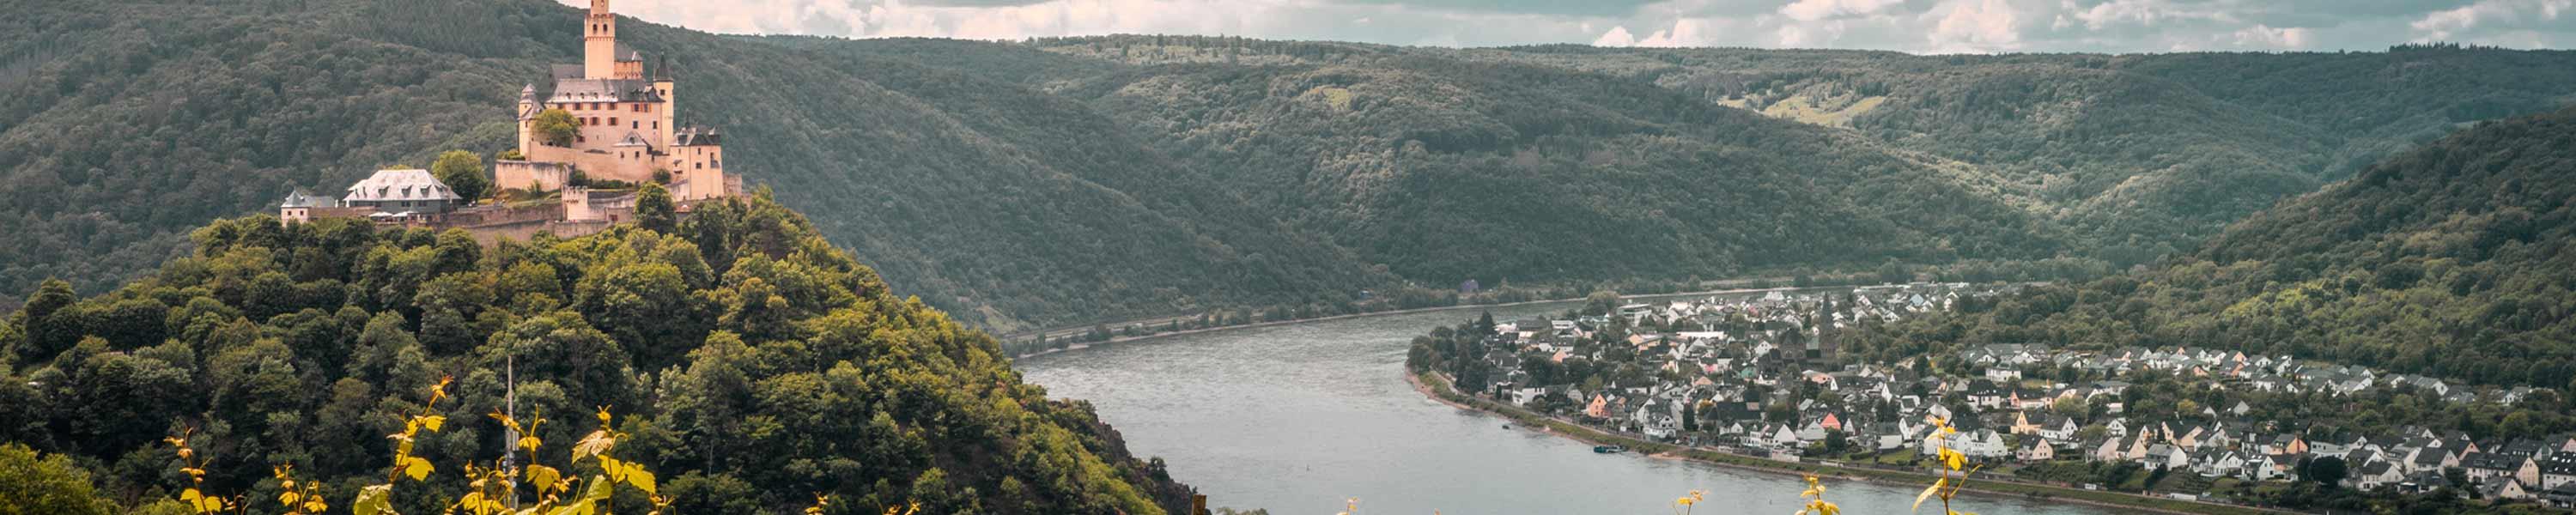 Travel Germany UNESCO World Heritage Upper Middle Rhine Valley